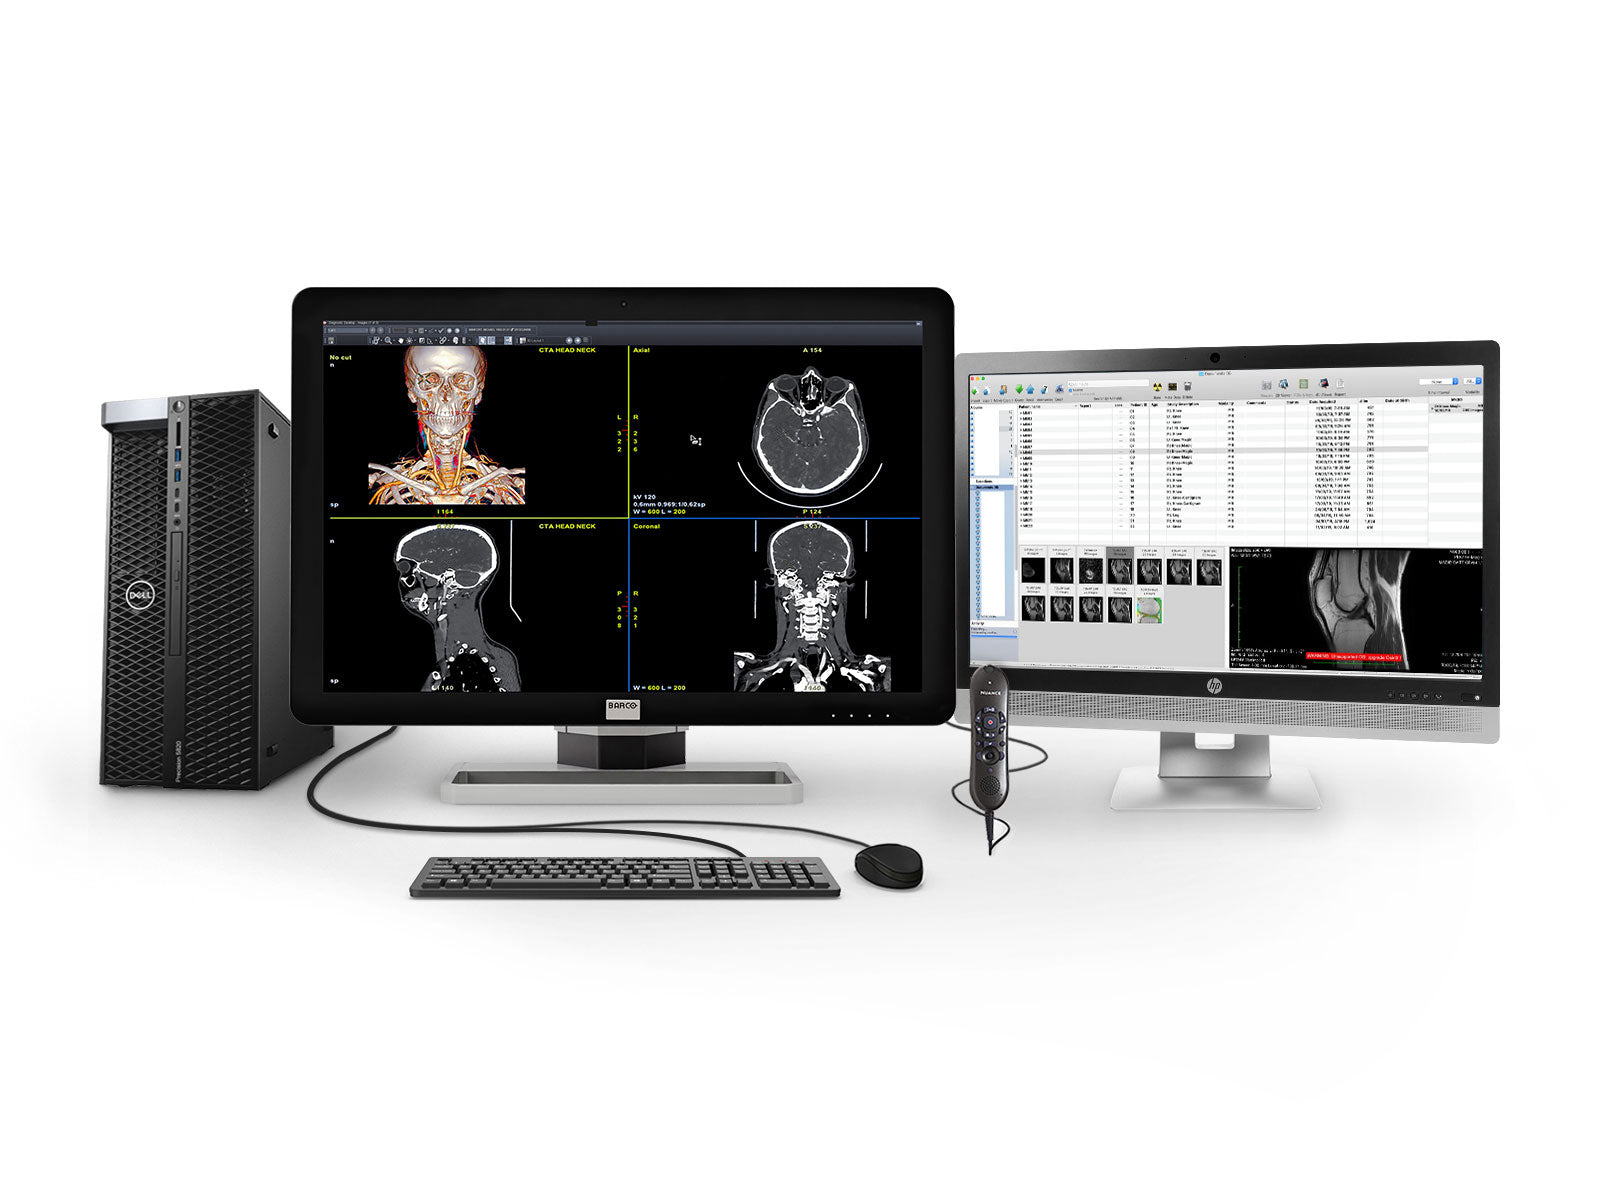 Barco General Radiology Reading Station | Coronis 6MP MDCC-6430 | Dell i9 Workstation | Nuance Mic | 24" Worklist Monitors (64305820) Monitors.com 